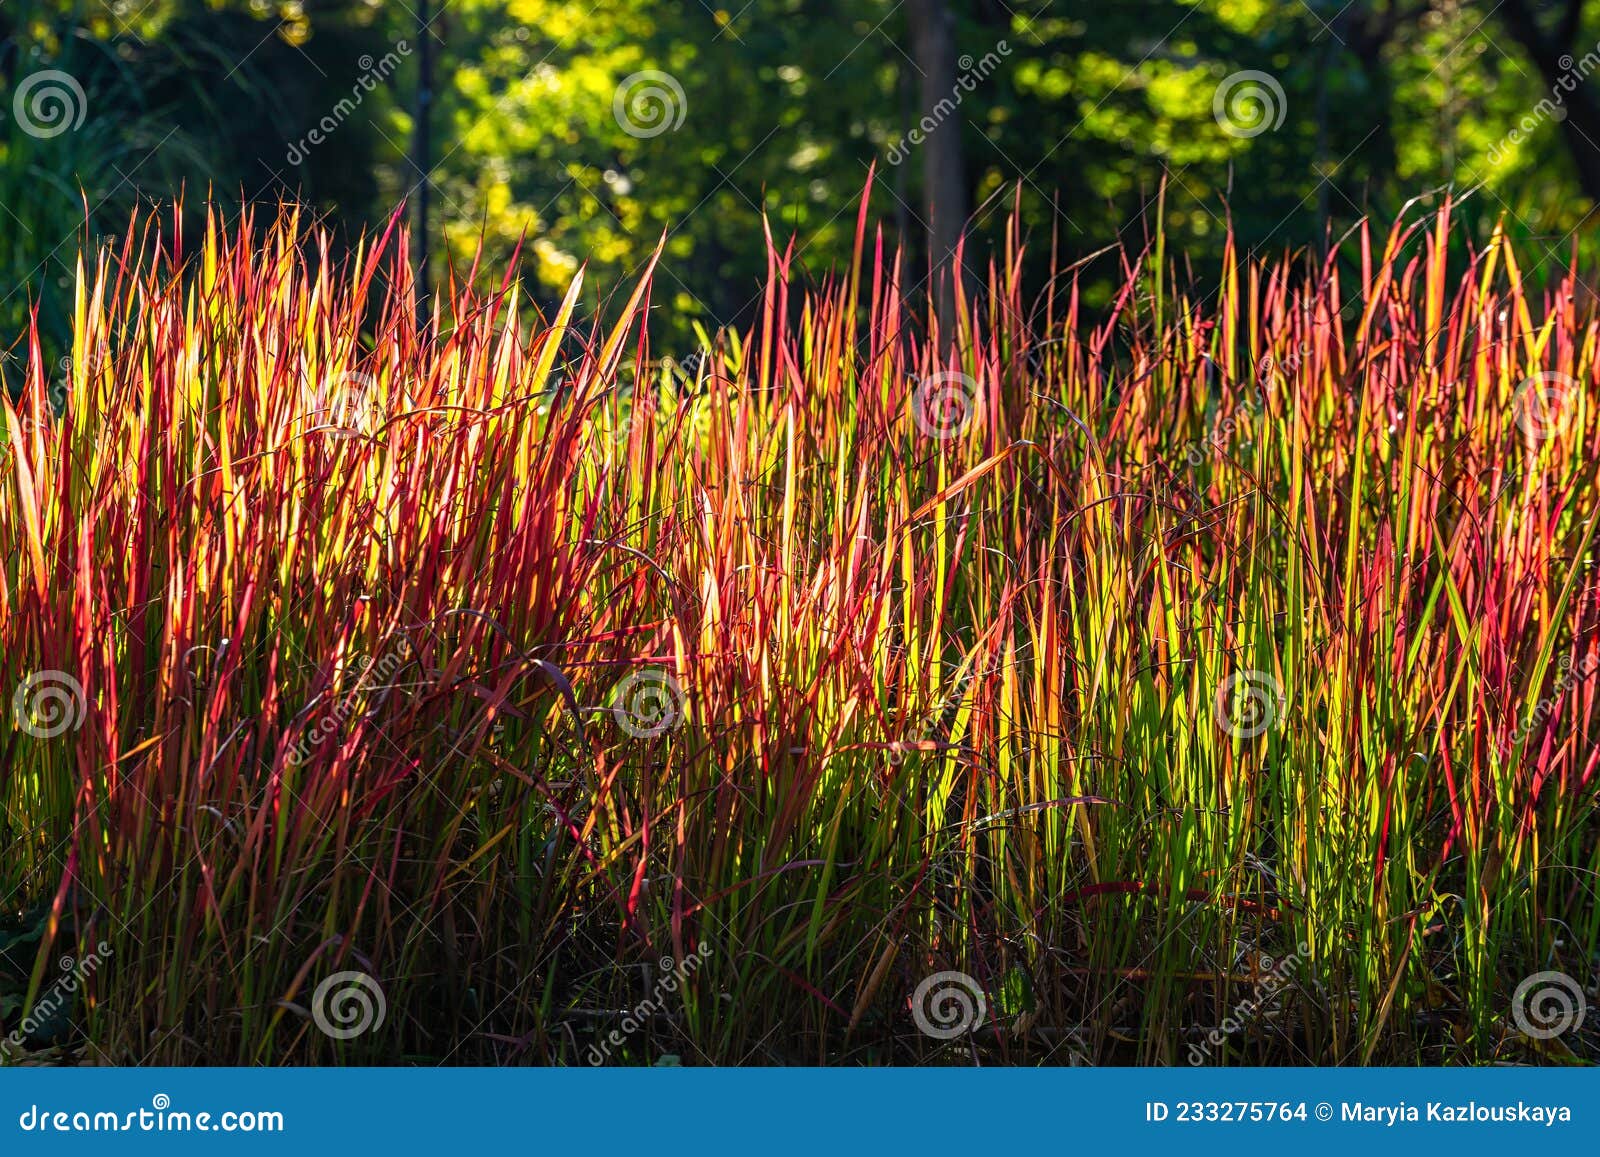 ornamental japanese blood grass or imperata cylindrica `rubra` backlit with evening sun outdoors. beautiful perennial plant with